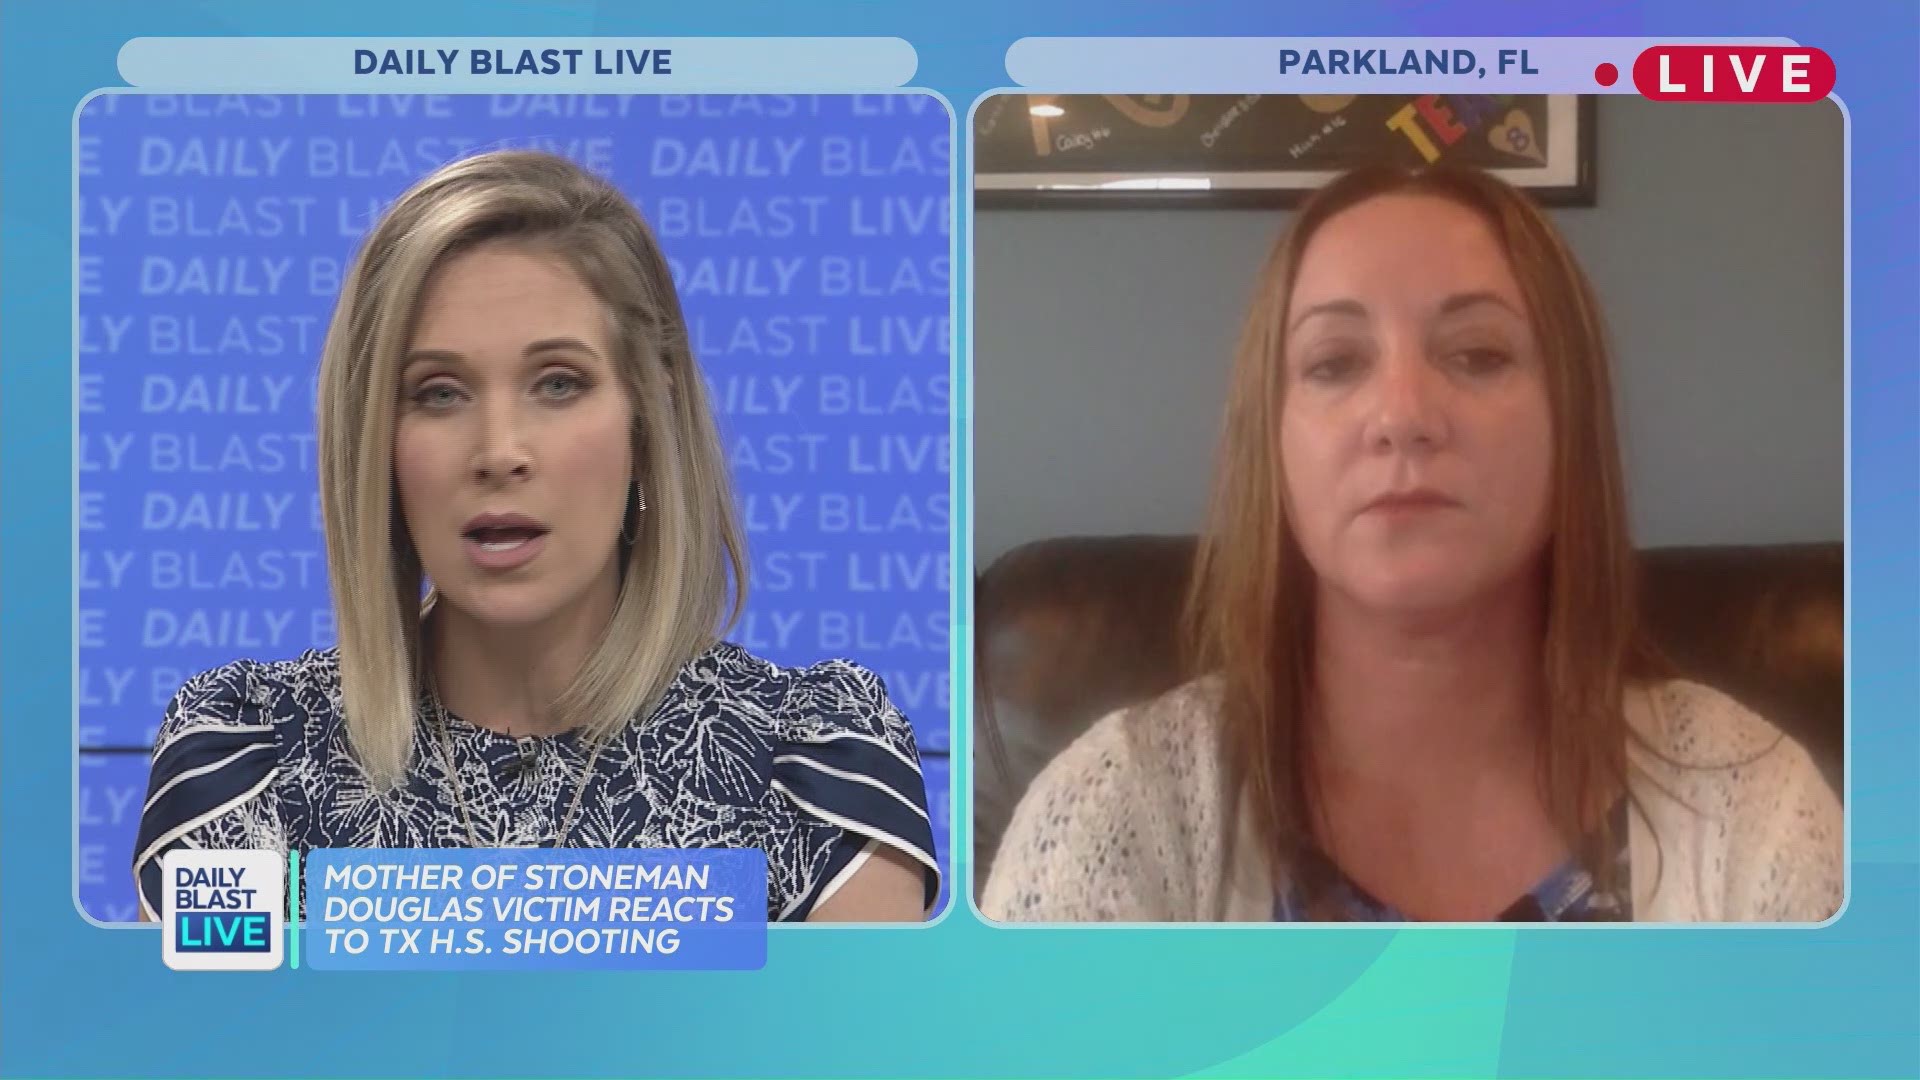 Mother of Parkland shooting victim, Lori Alhadeff, shares her insight into the community reaction following the Santa Fe school shooting. After losing her 14-year-old daughter Alyssa, Lori Alhadeff has become a leading advocate for school safety and is sp